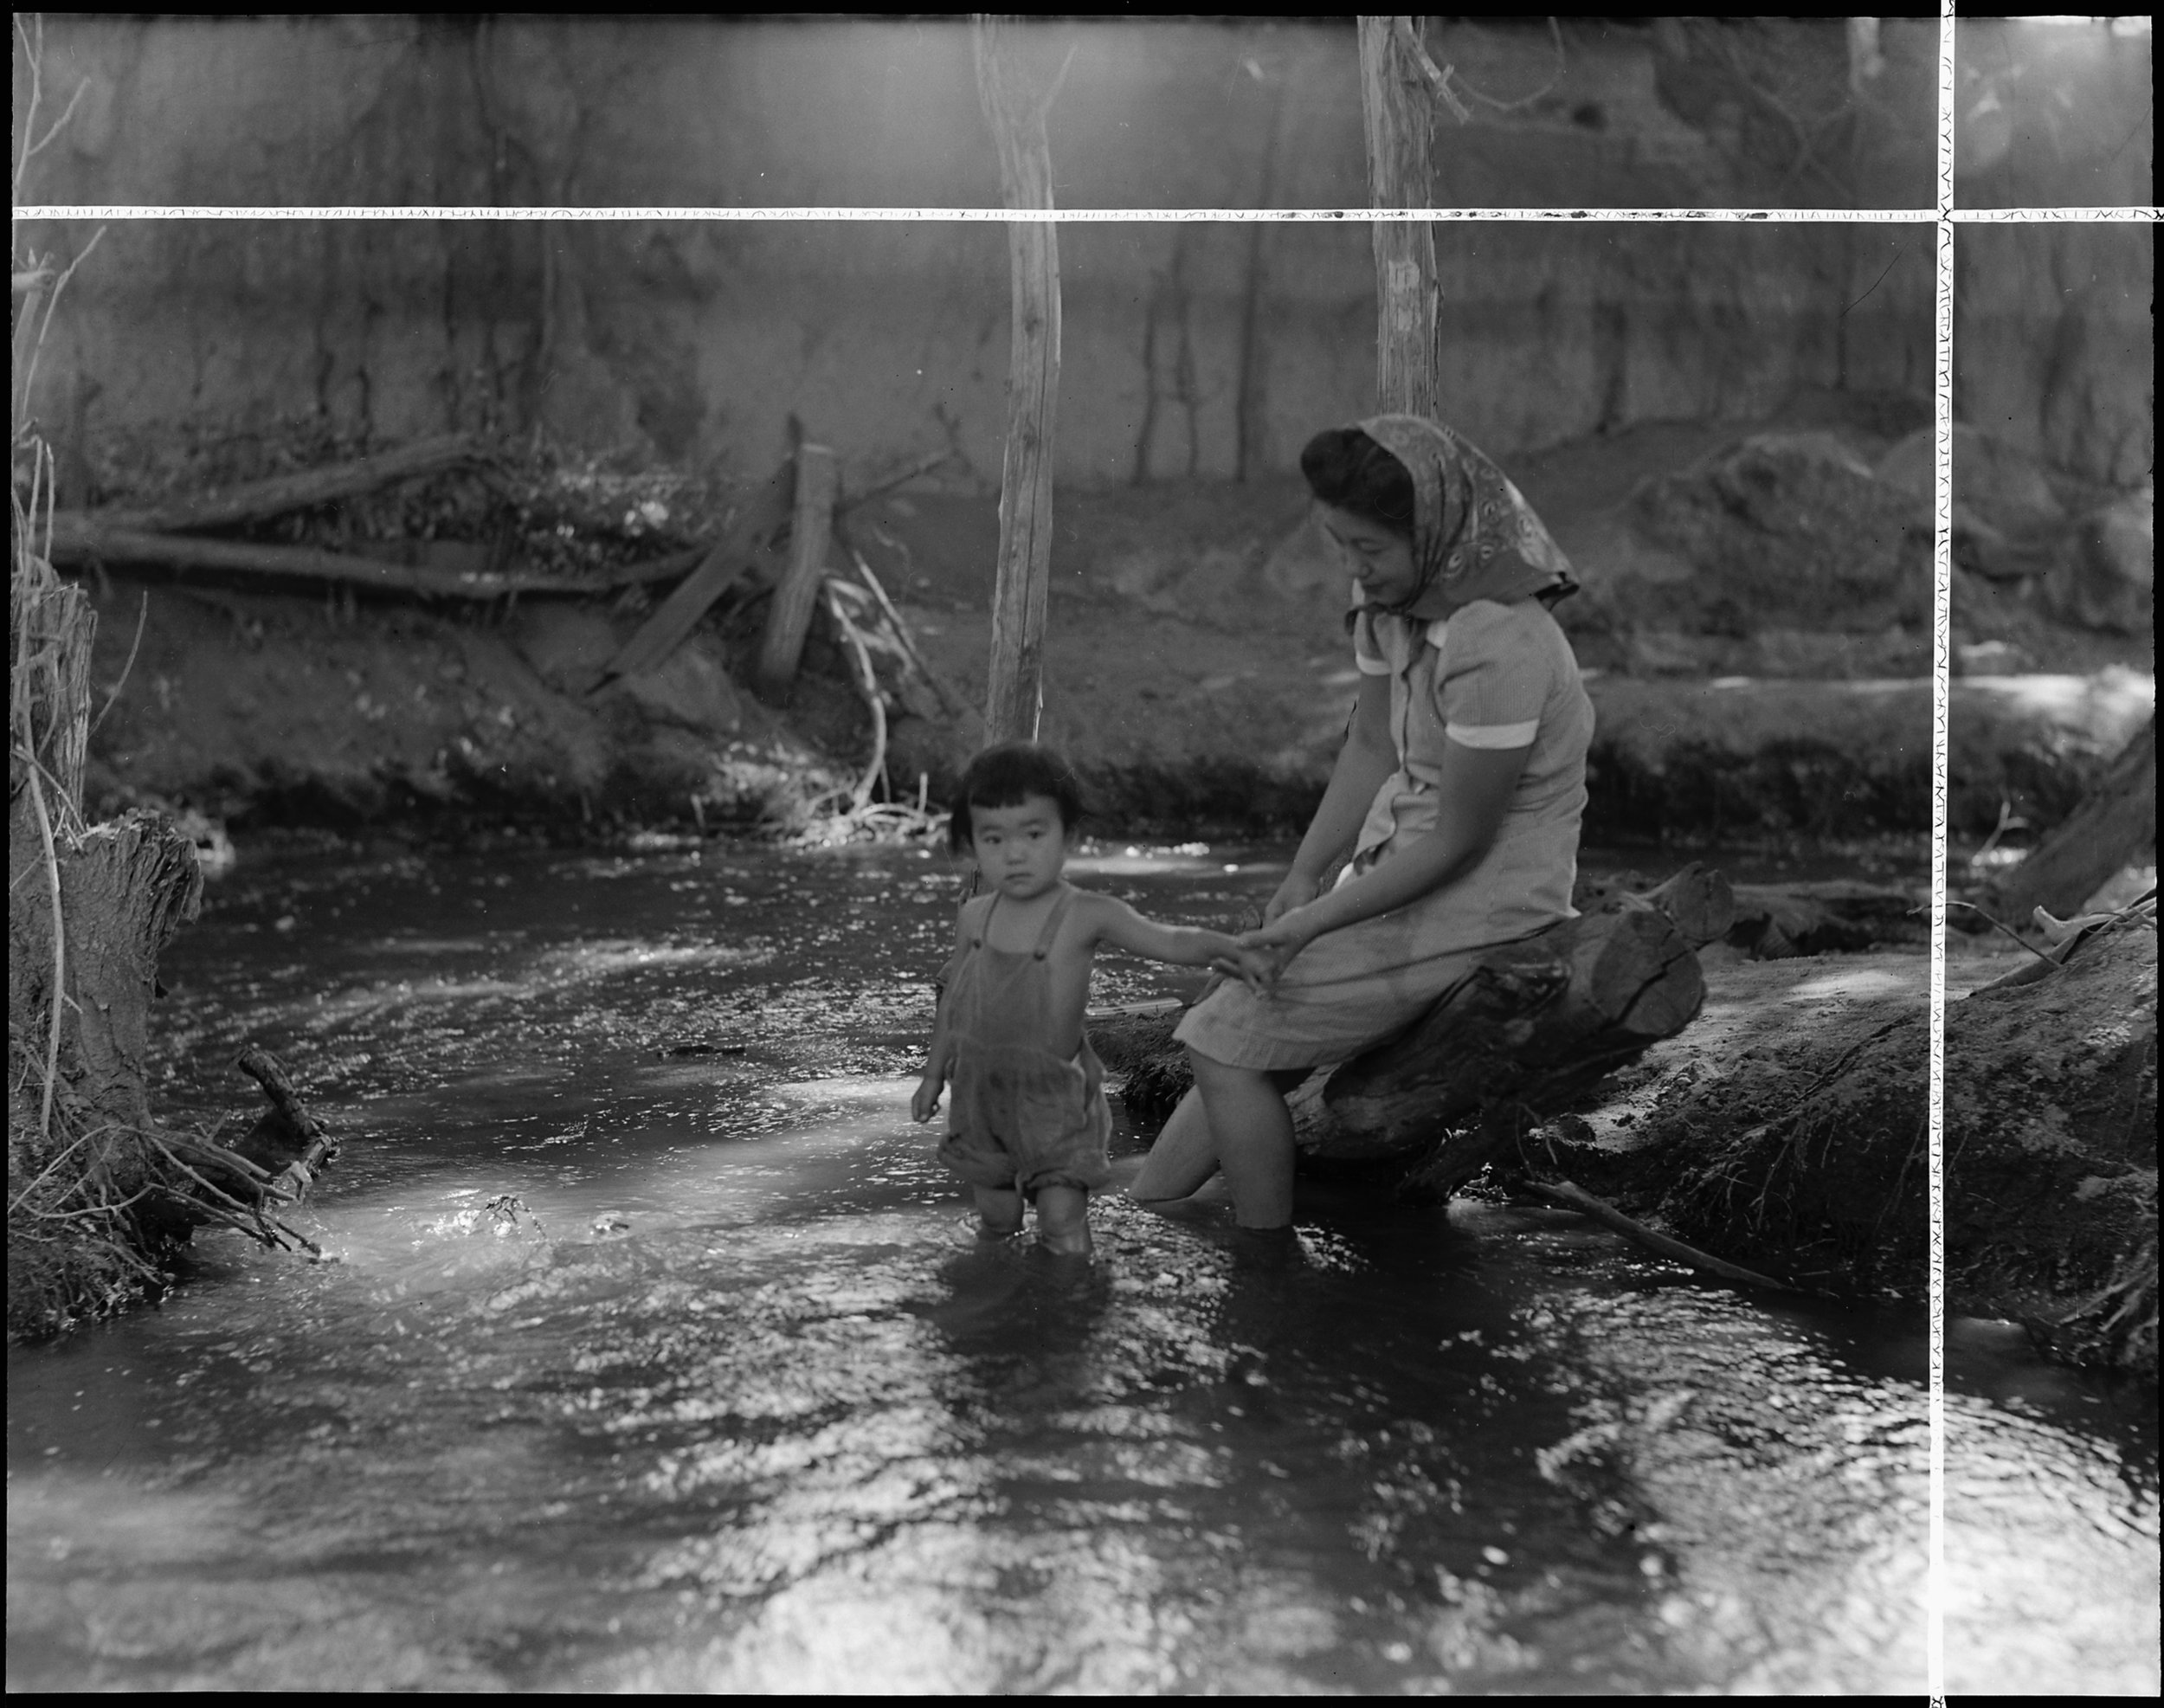  Manzanar Relocation Center, Manzanar, California. Evacuees enjoying the creek which flows along the outer border of this War Relocation Authority center. 